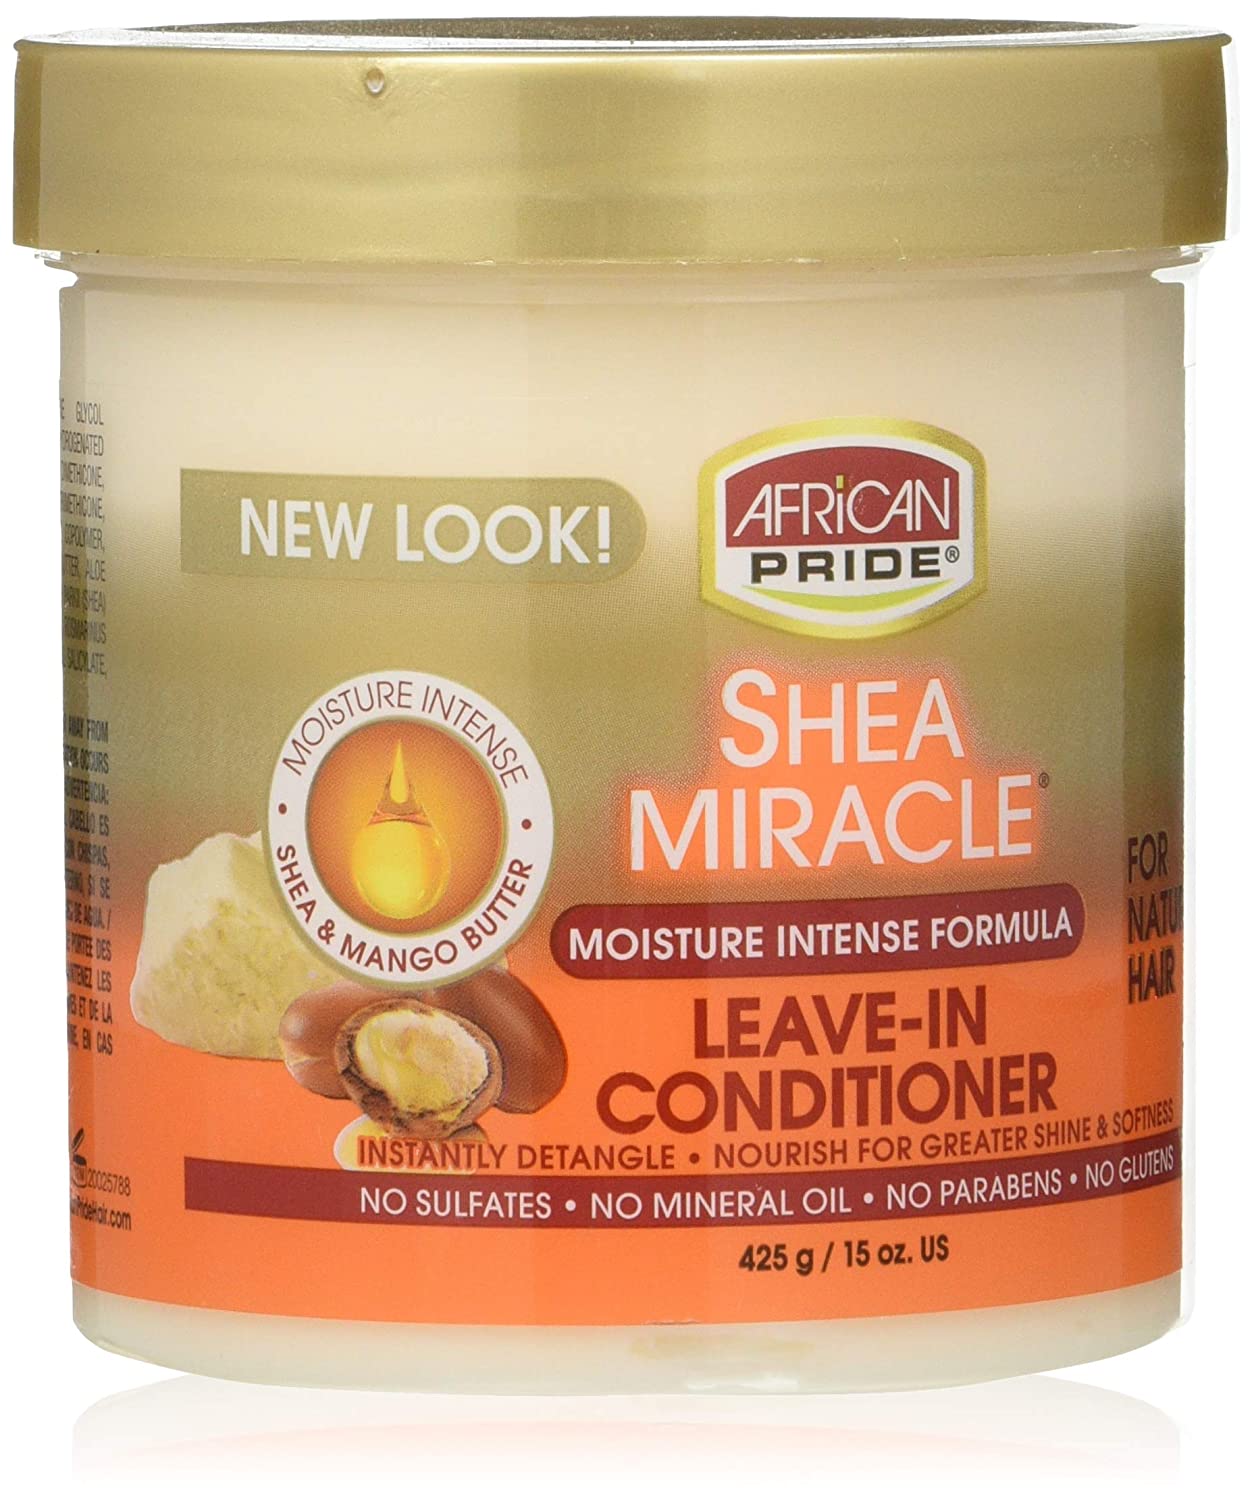 African Pride, Shea Miracle leave in conditioner, 425 g